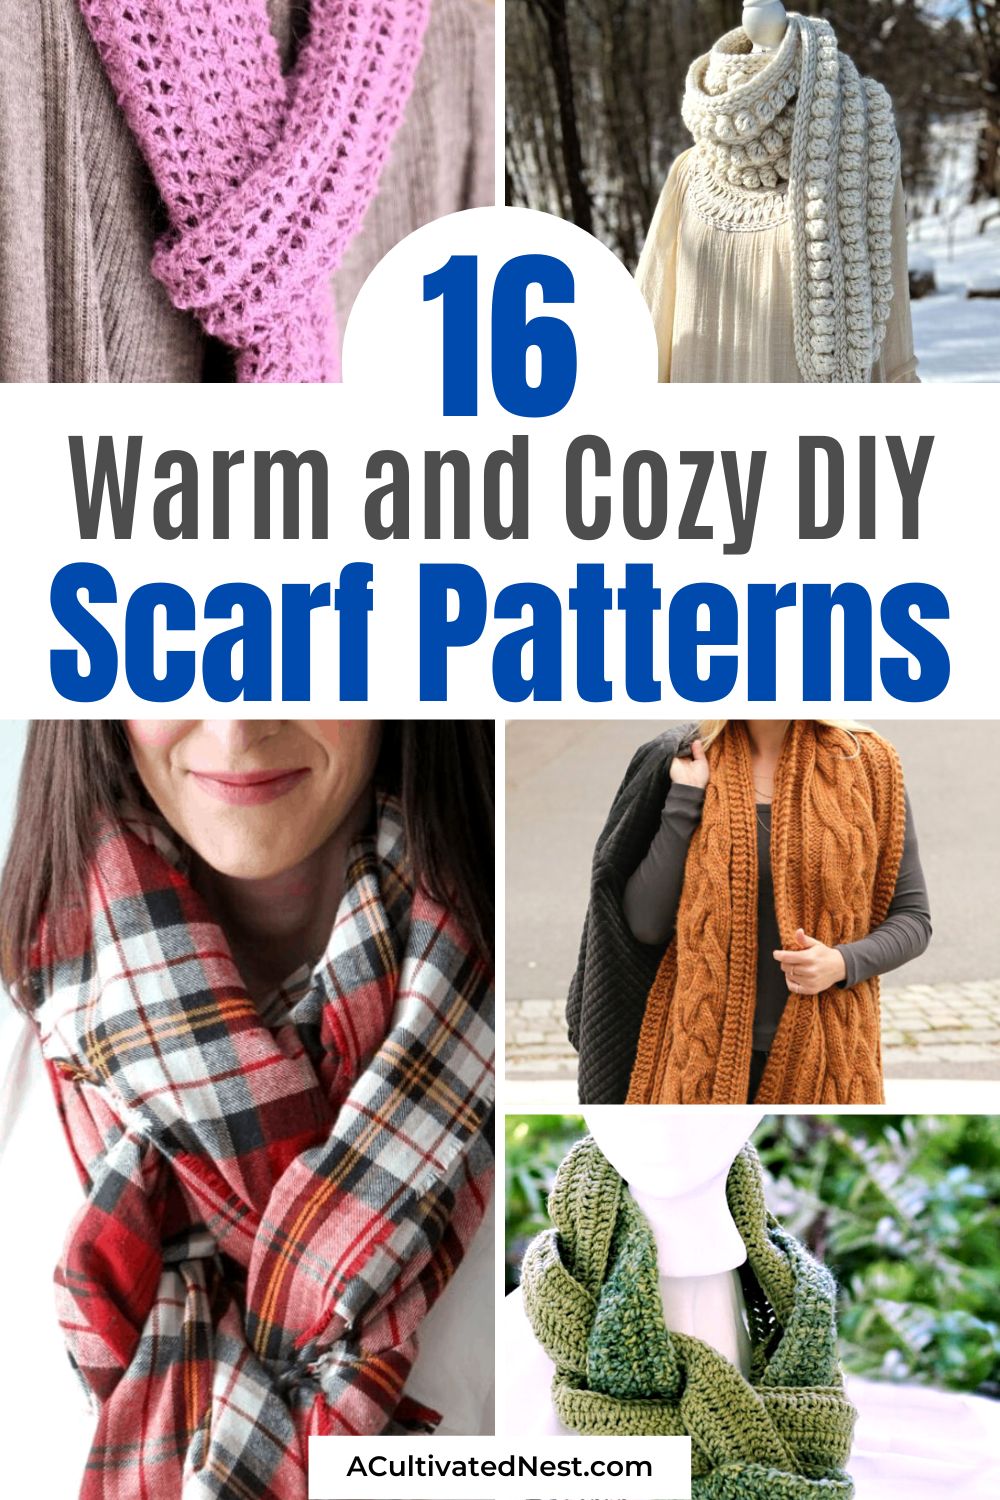 16 Cozy DIY Scarves to Make- Wrap yourself in warmth and style with these cozy DIY scarves! From classic knits to trendy infinity loops, these handmade scarves are the perfect way to stay warm and fashionable all season long. Get ready to create your own cozy masterpiece! | #DIYFashion #WinterStyle #HandmadeScarves #homemadeGifts #ACultivatedNest